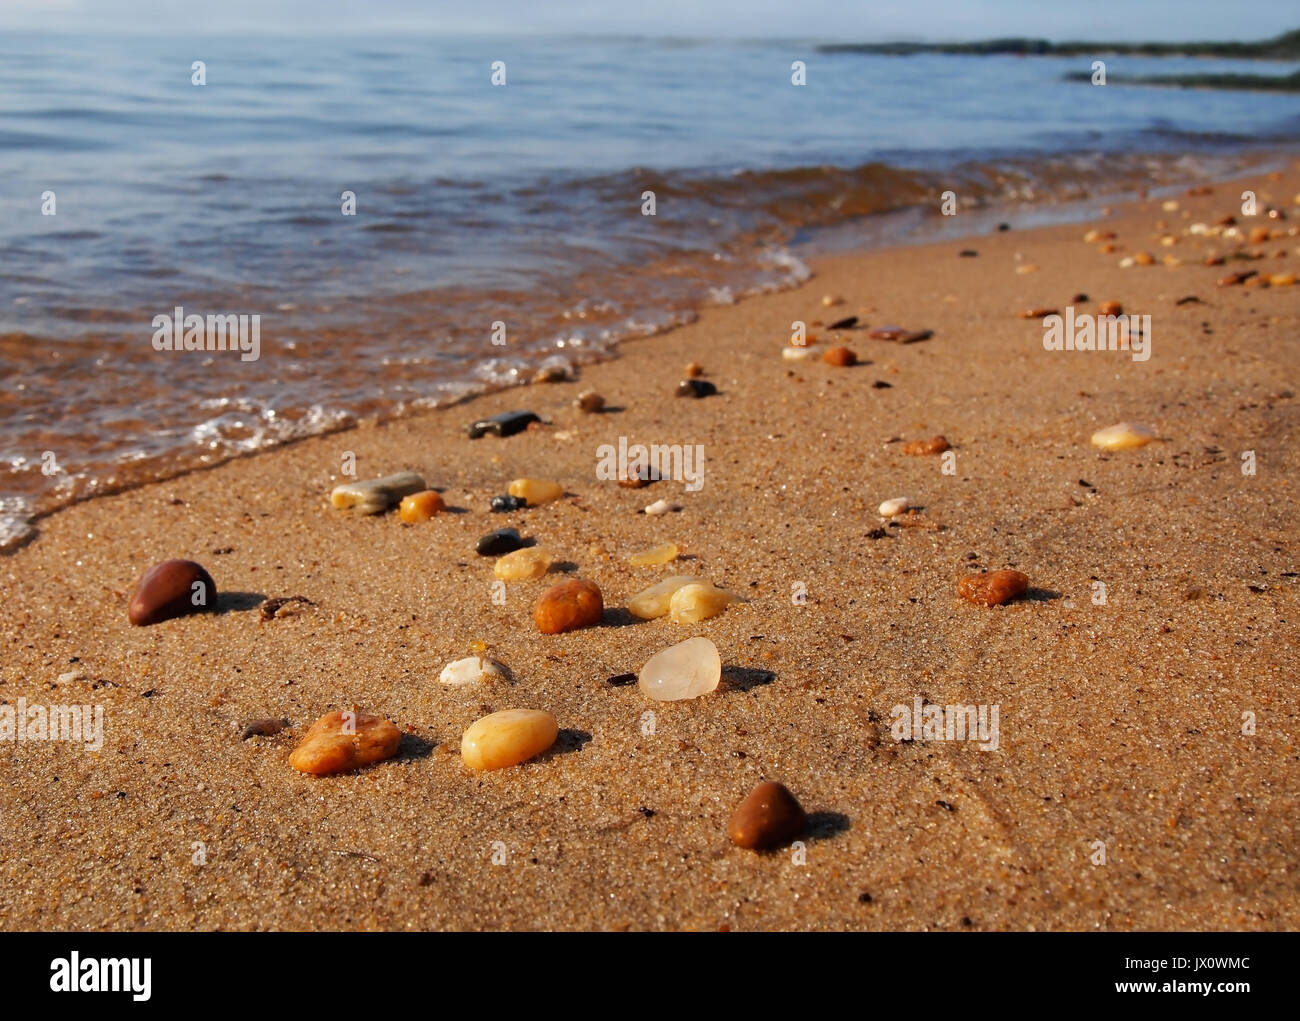 Wet beach pebbles on top of the sand sparkle in the sunlight at the water's edge with gentle, bubbling tides rolling in. Stock Photo